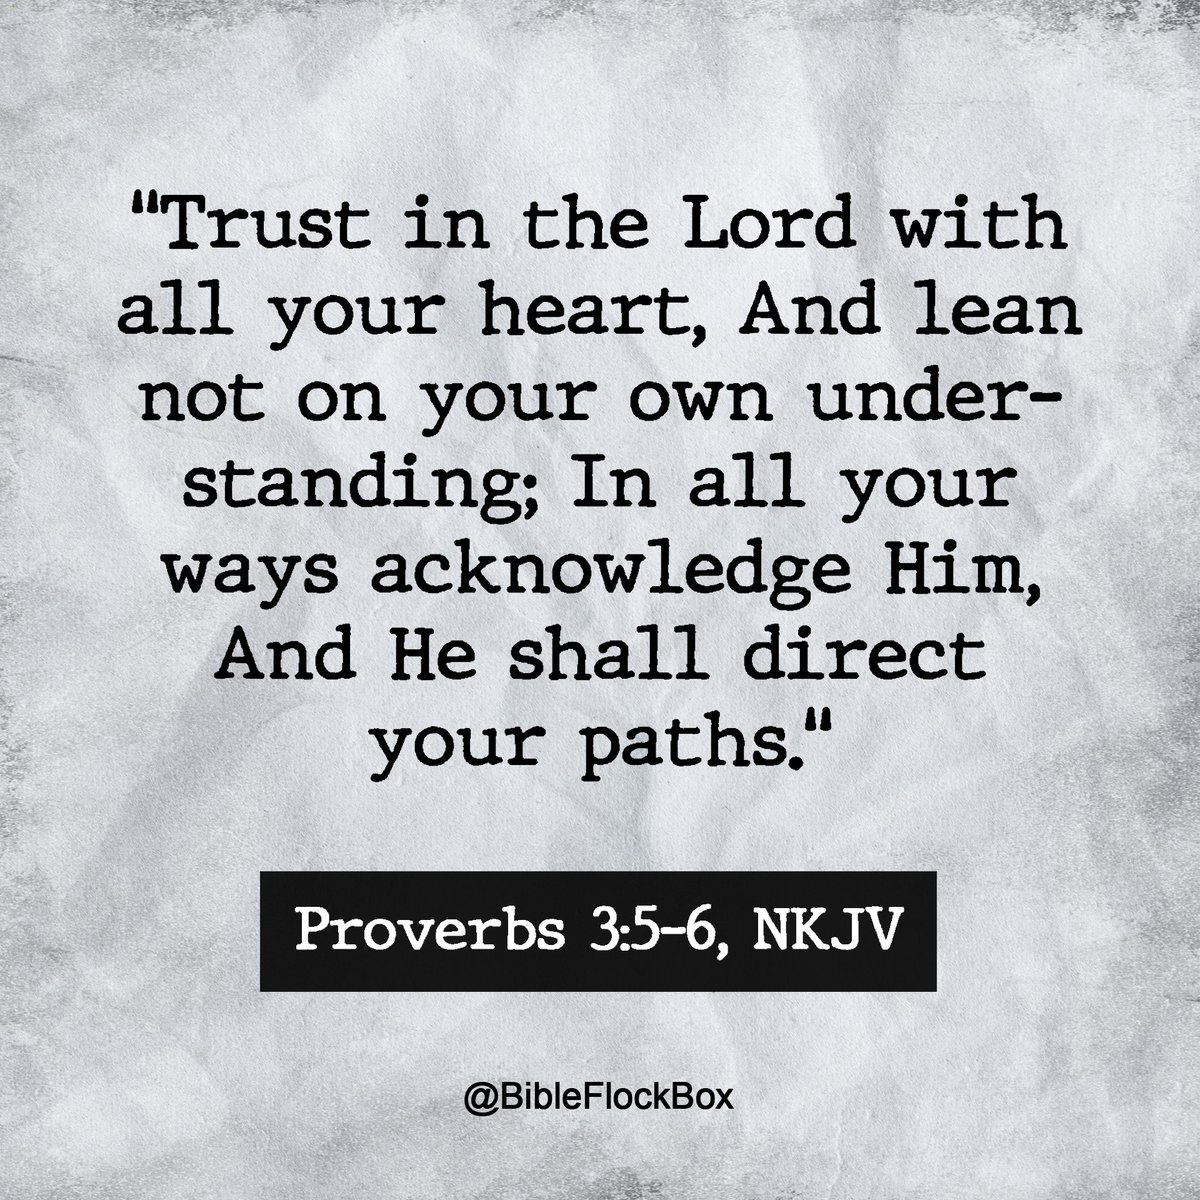 Trust in the Lord and follow His leading. He will never disappoint you. He has never disappointed me.

#trustinthelord #trustgod #trustjesus #trustingingod #followjesus #followgod #godsleading #godisgood #proverbs356